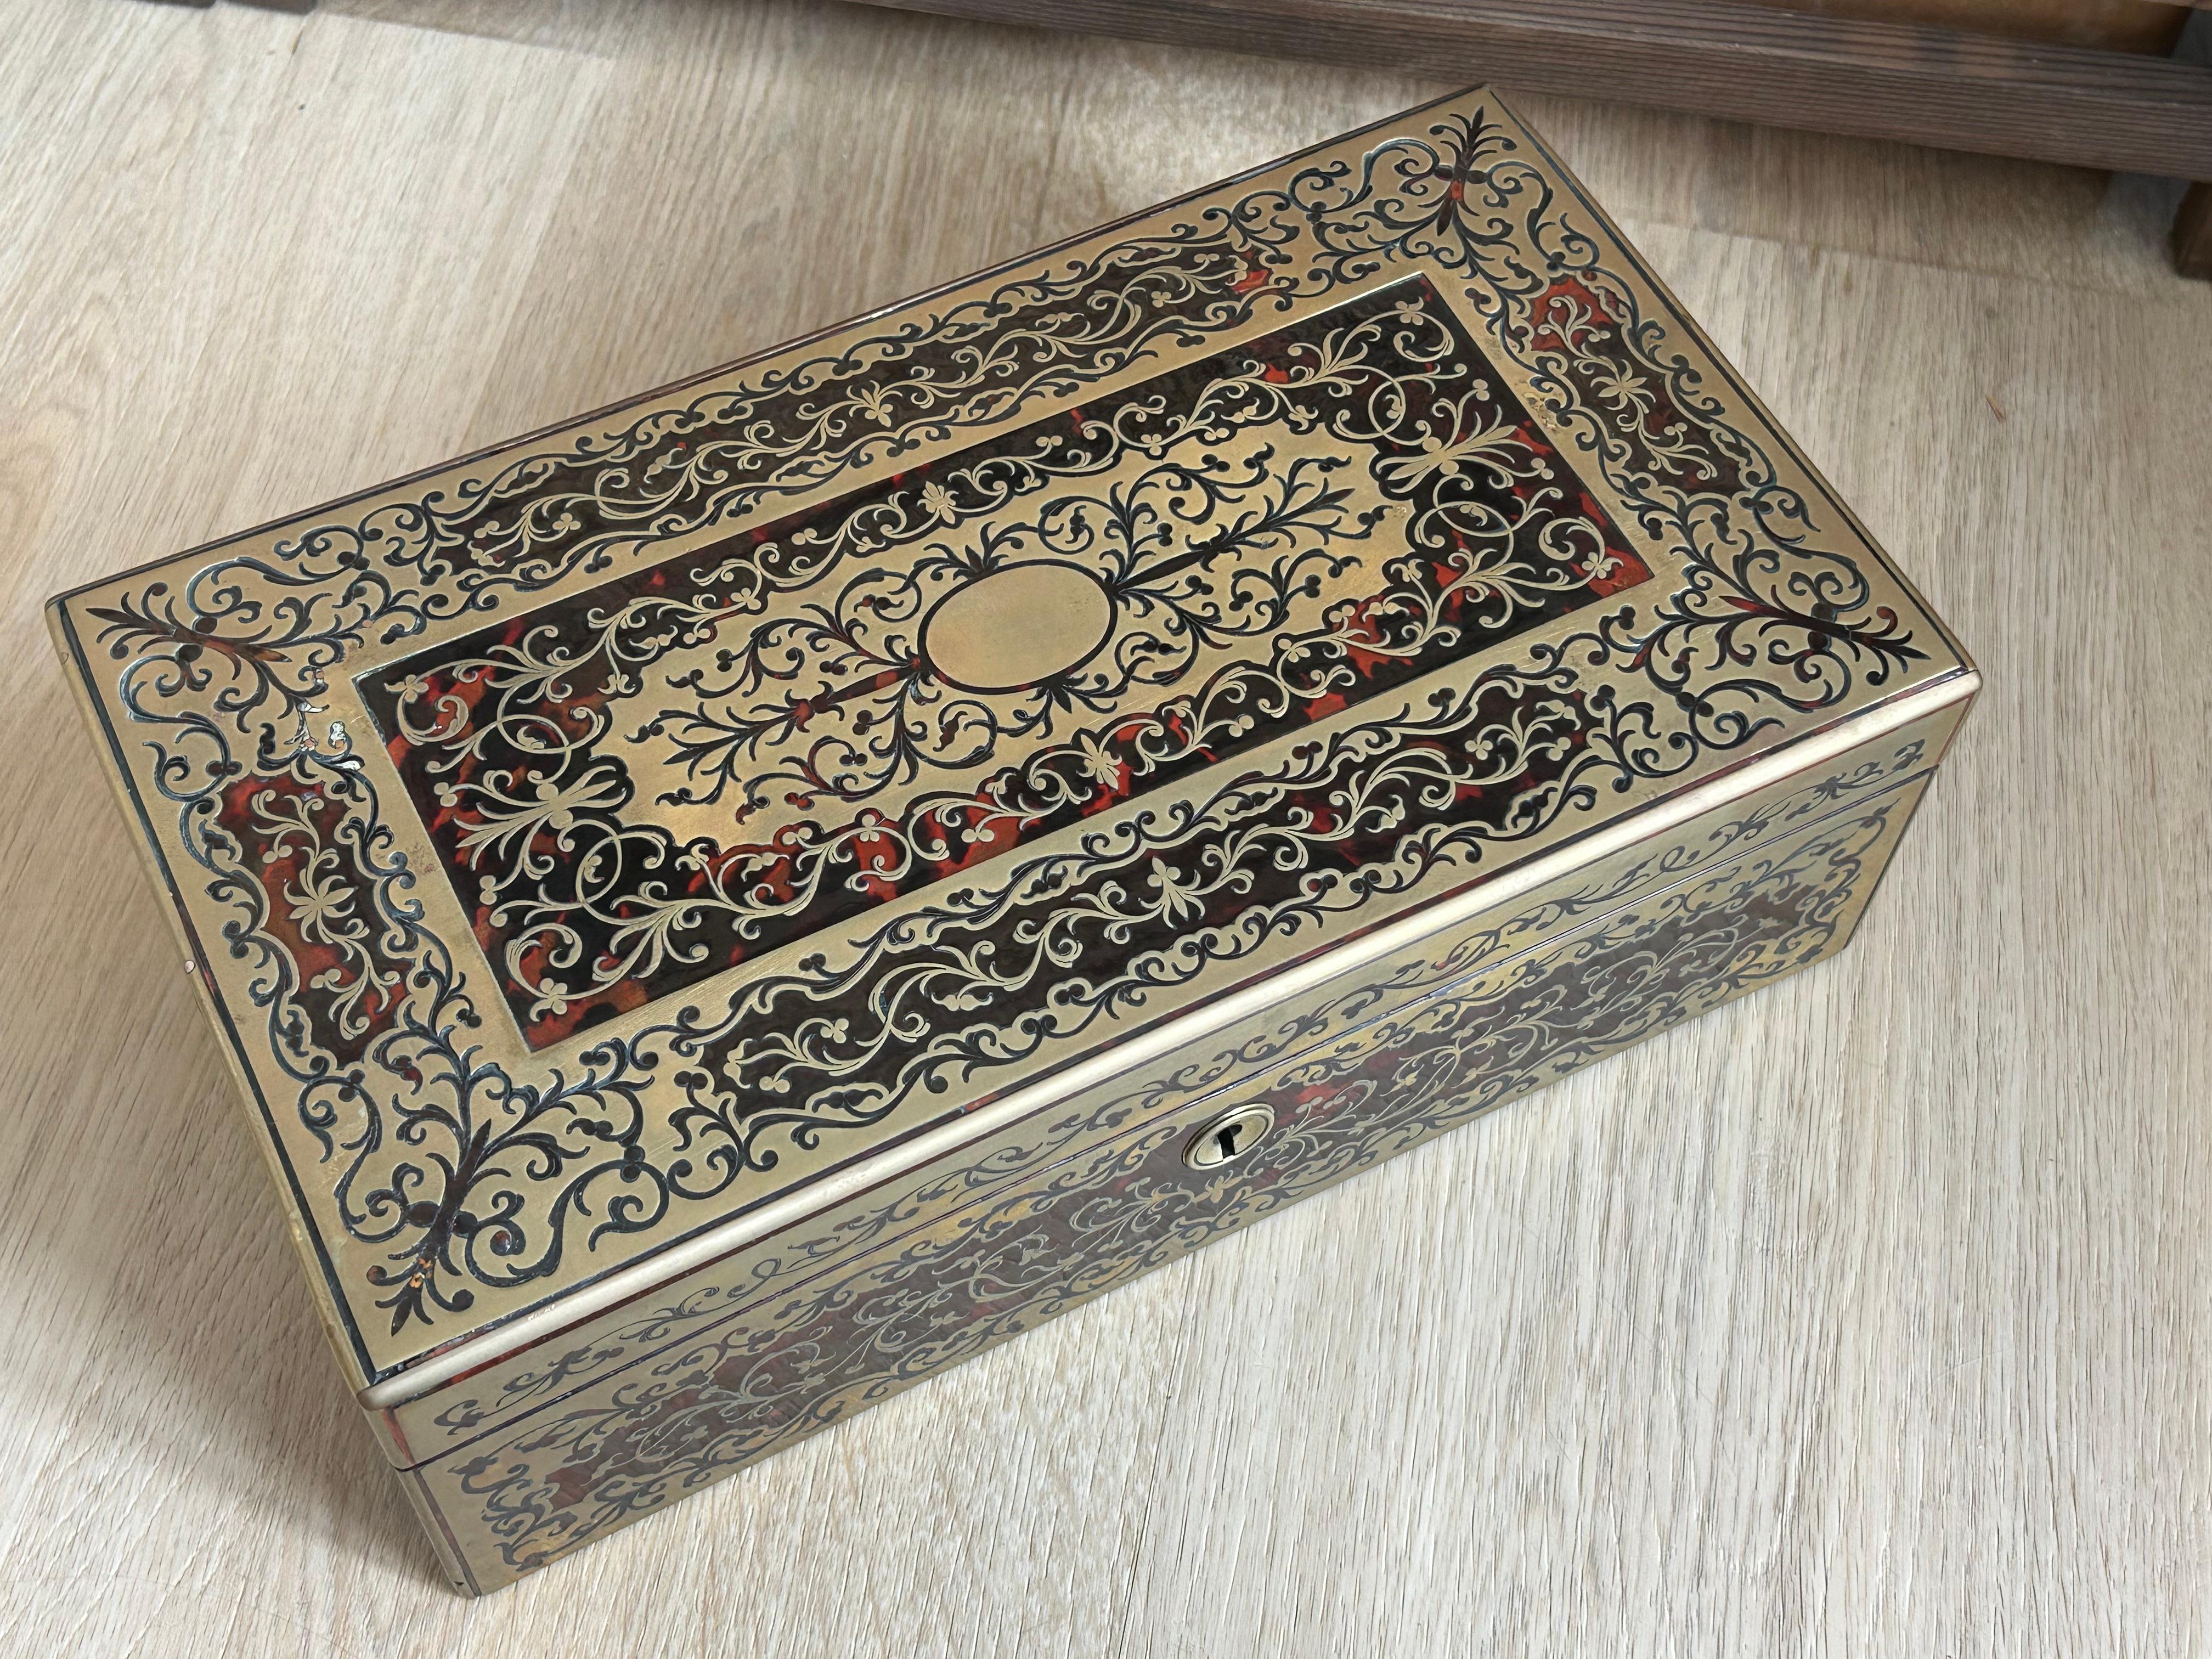 Cigar Box in the style of École Boulle by JC Vickery with tortoiseshell and brass inlay, on the lid the brass badge isn't engraved.
The interior is fitted with cedar wood. No keys.

The pictures are part of the description.

Warning: Since this